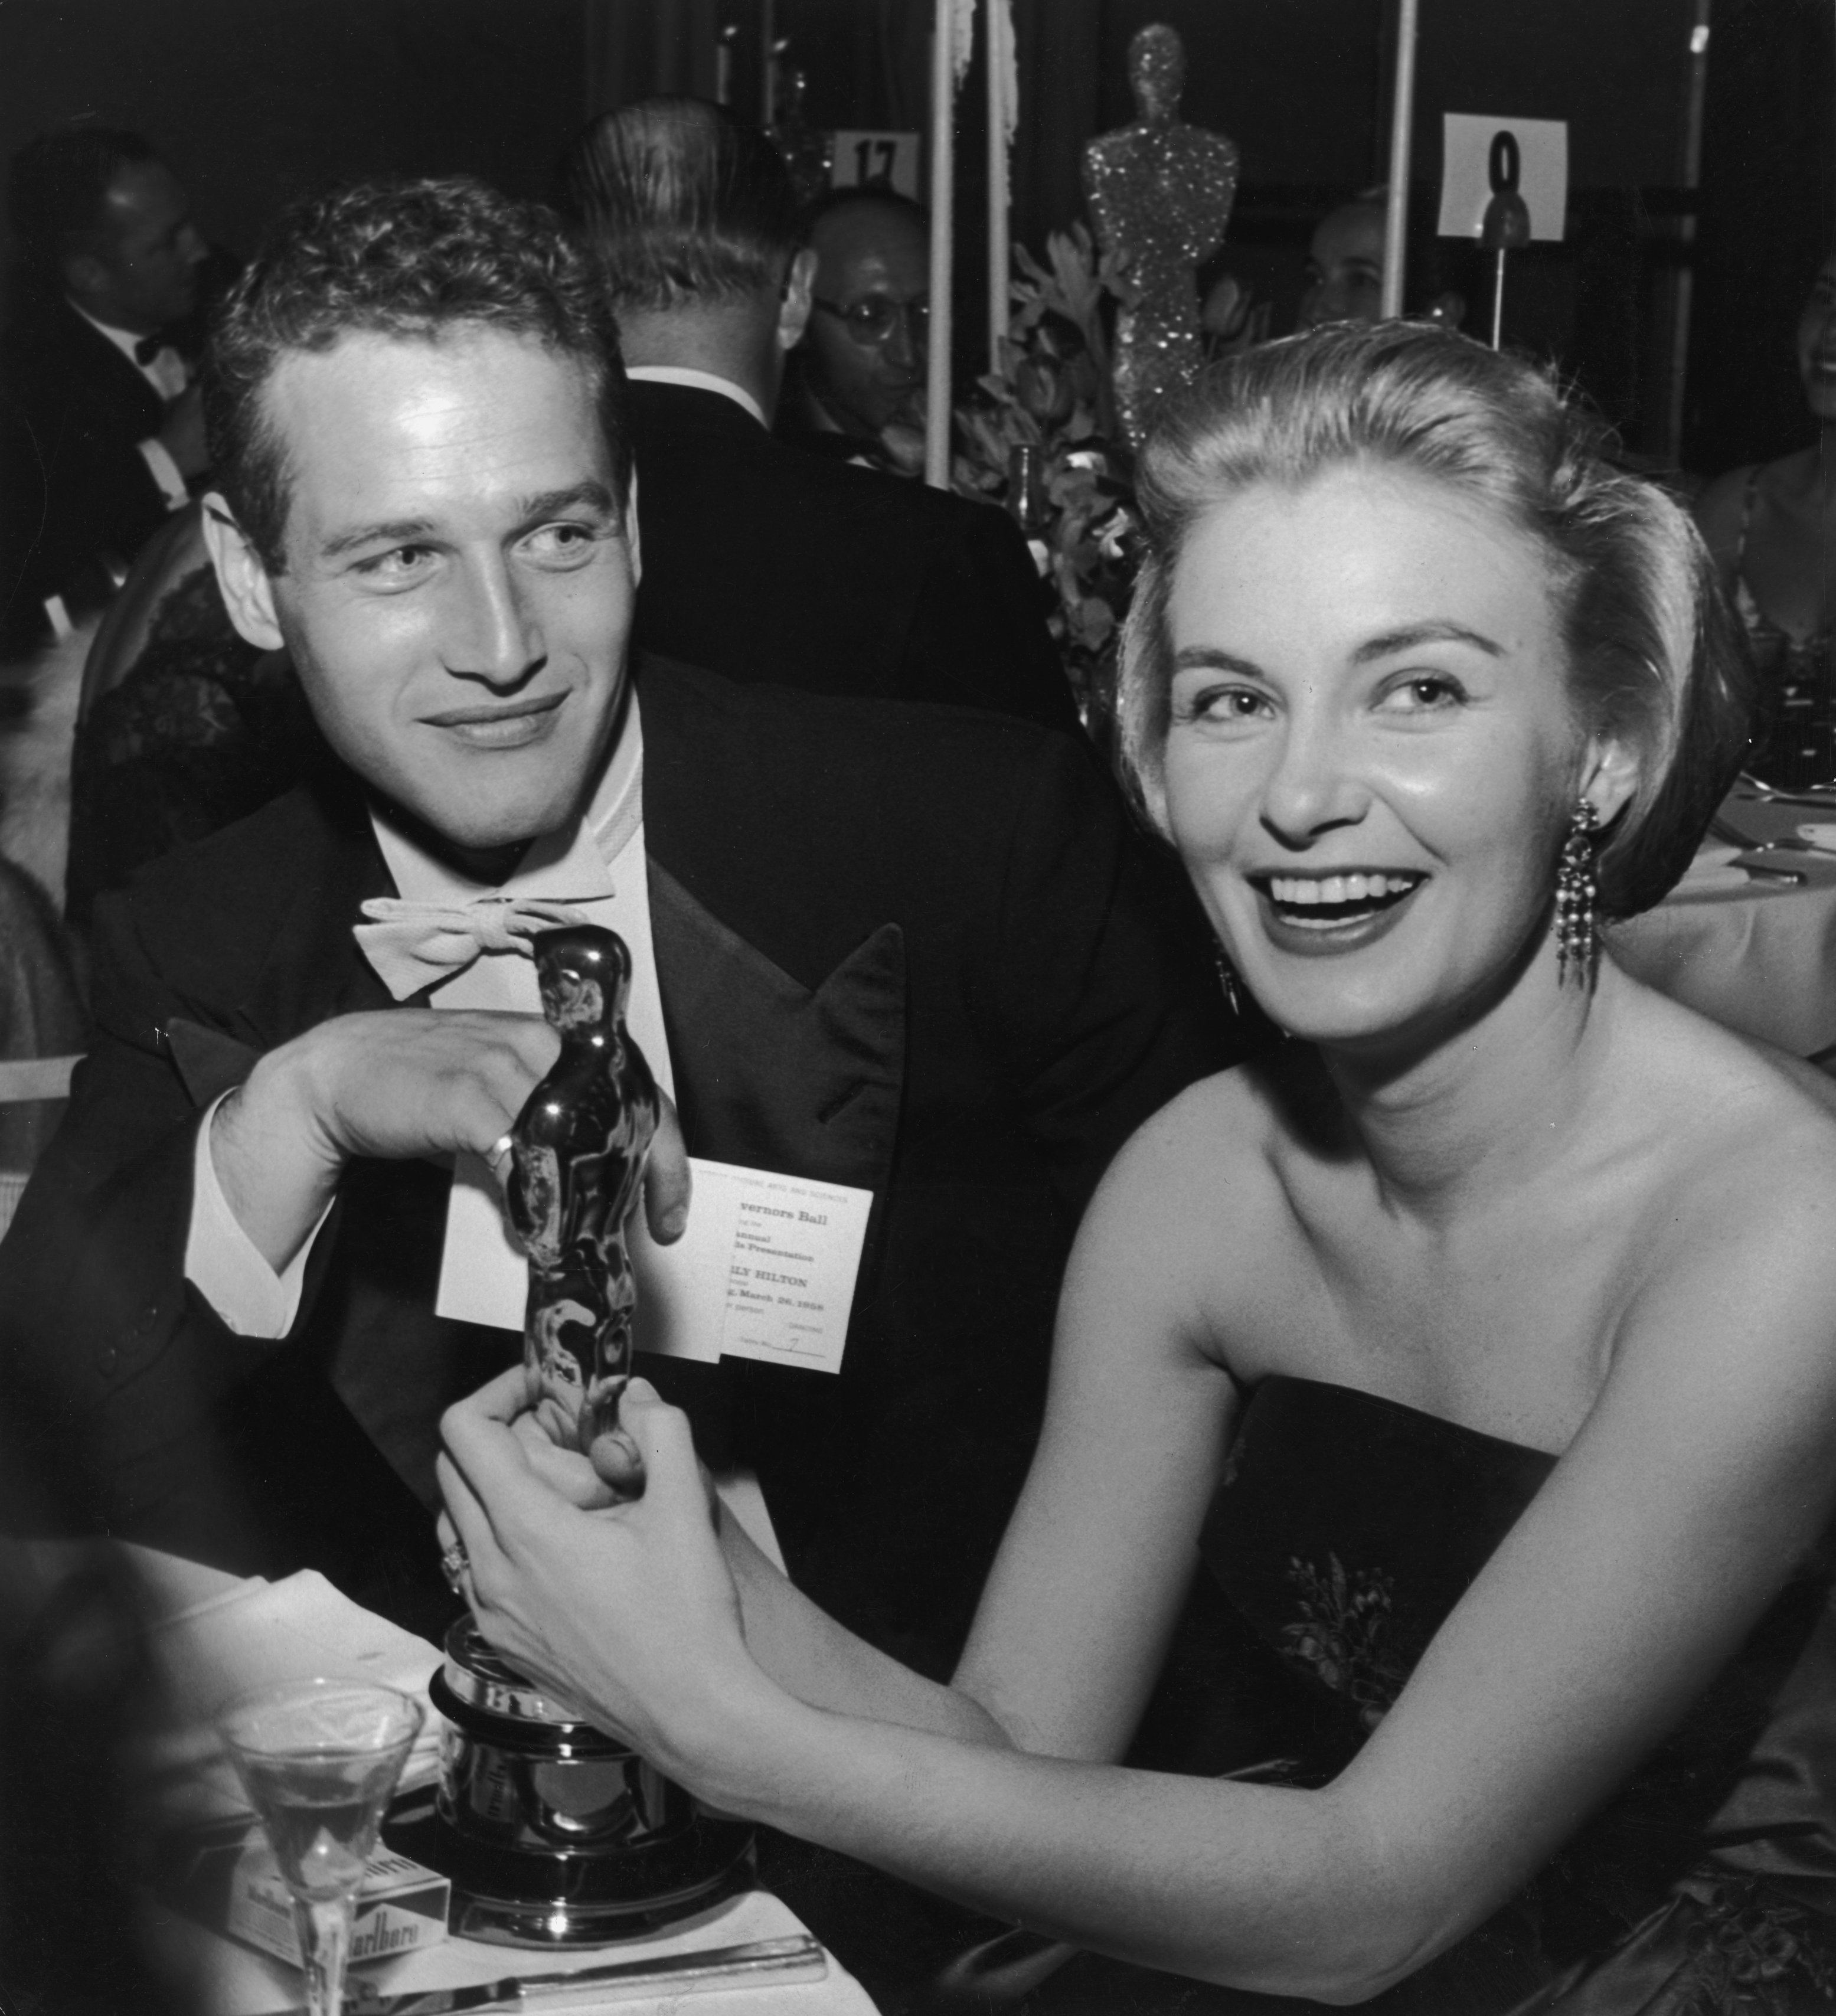 American actor Joanne Woodward holds her Oscar statuette while sitting next to husband, American actor Paul Newman, during the Governor's Ball, an Academy Awards party held at The Beverly Hilton Hotel, Beverly Hills, California. | Source: Getty Images